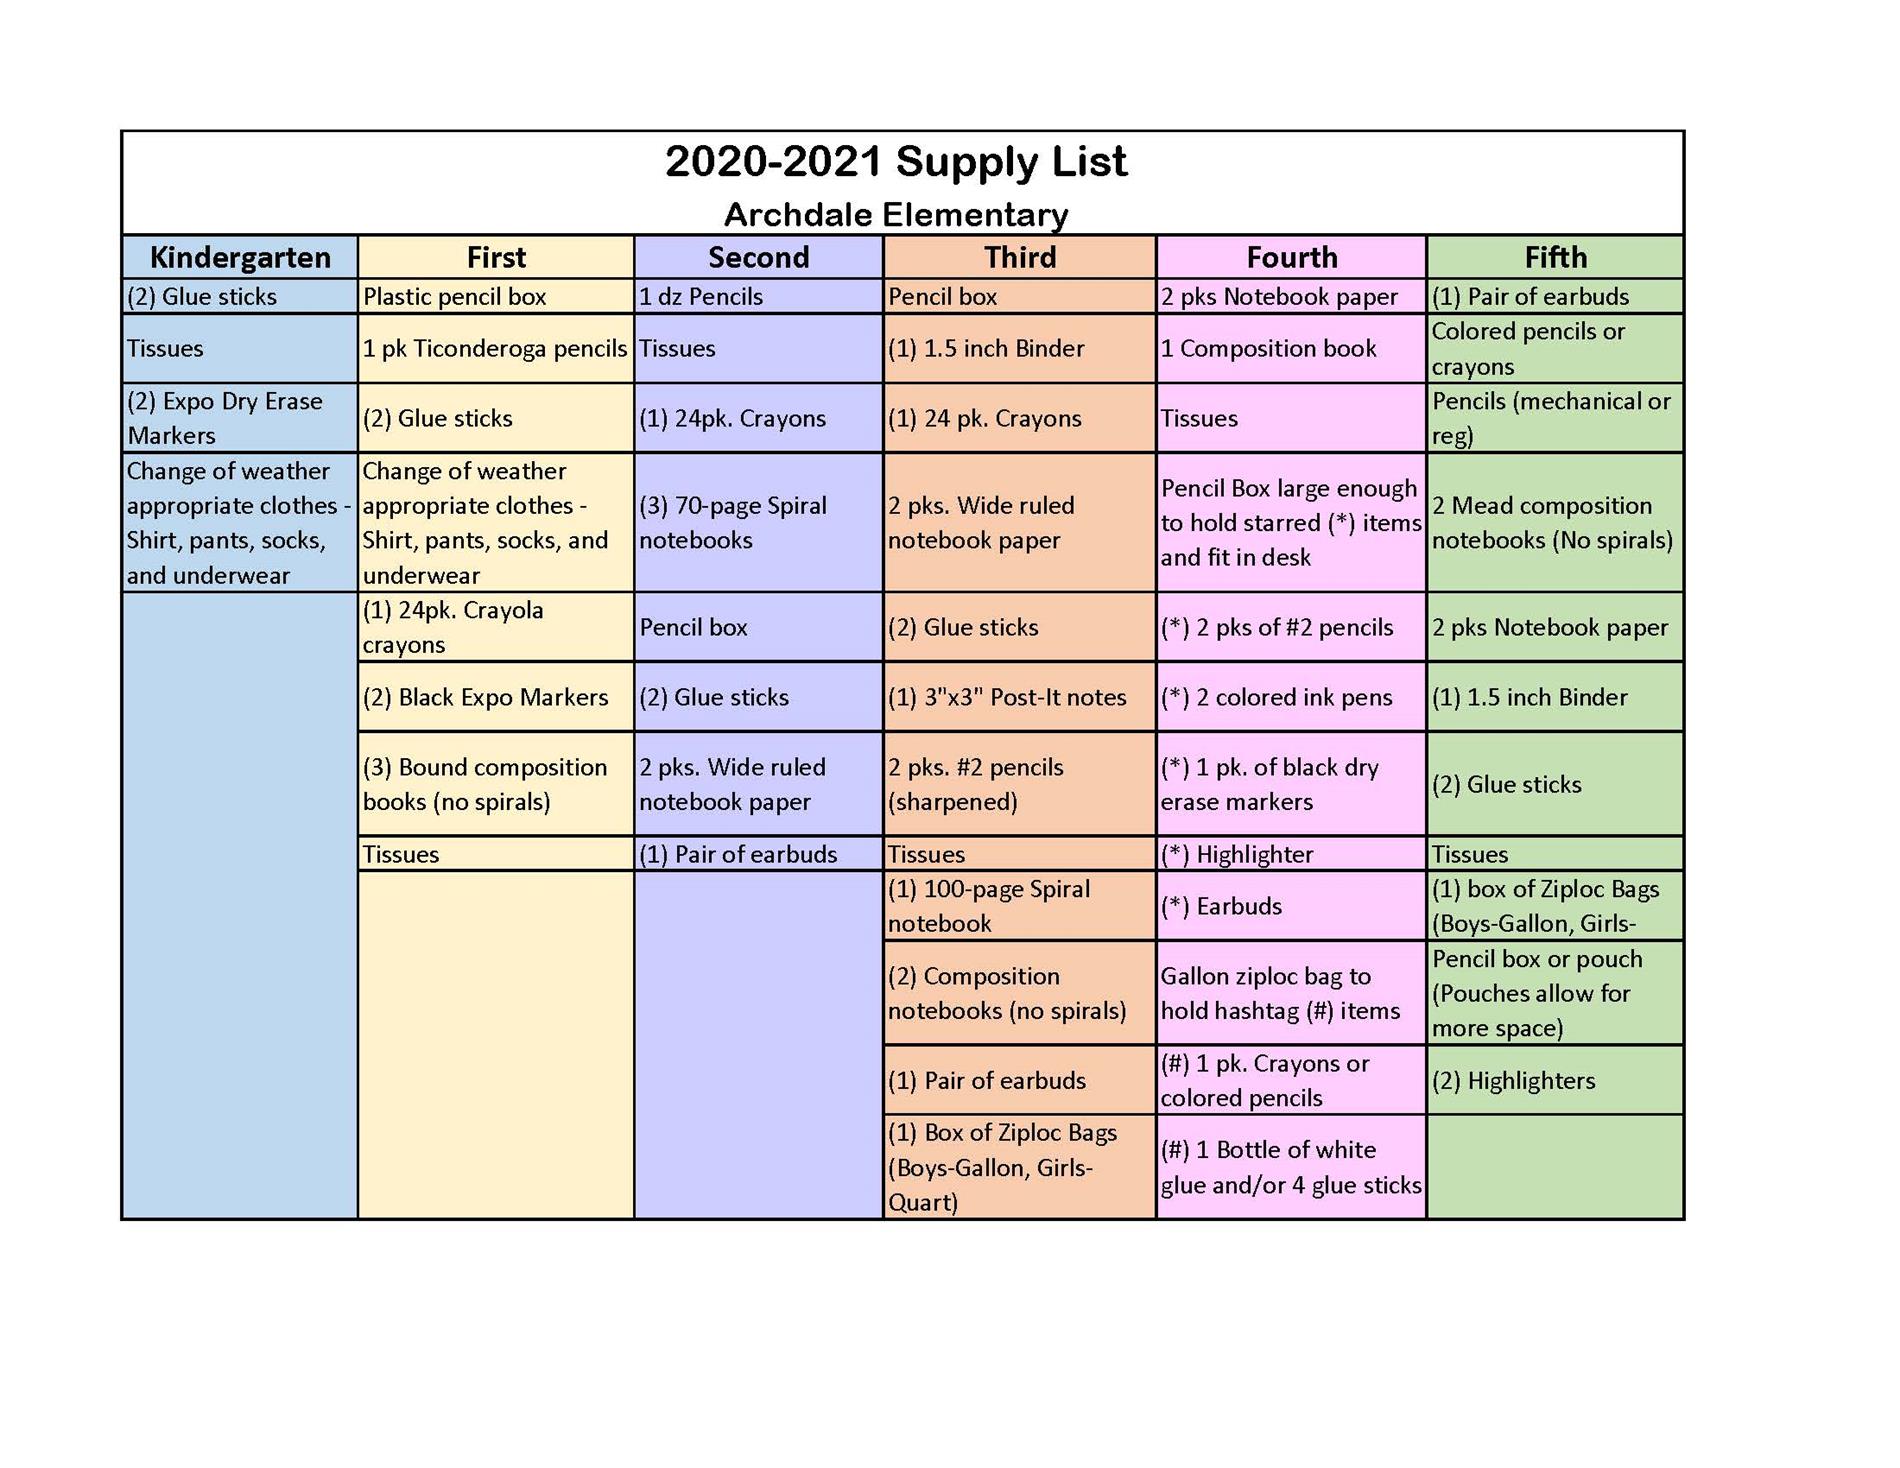 Suppliers List 2010 - Services to Schools